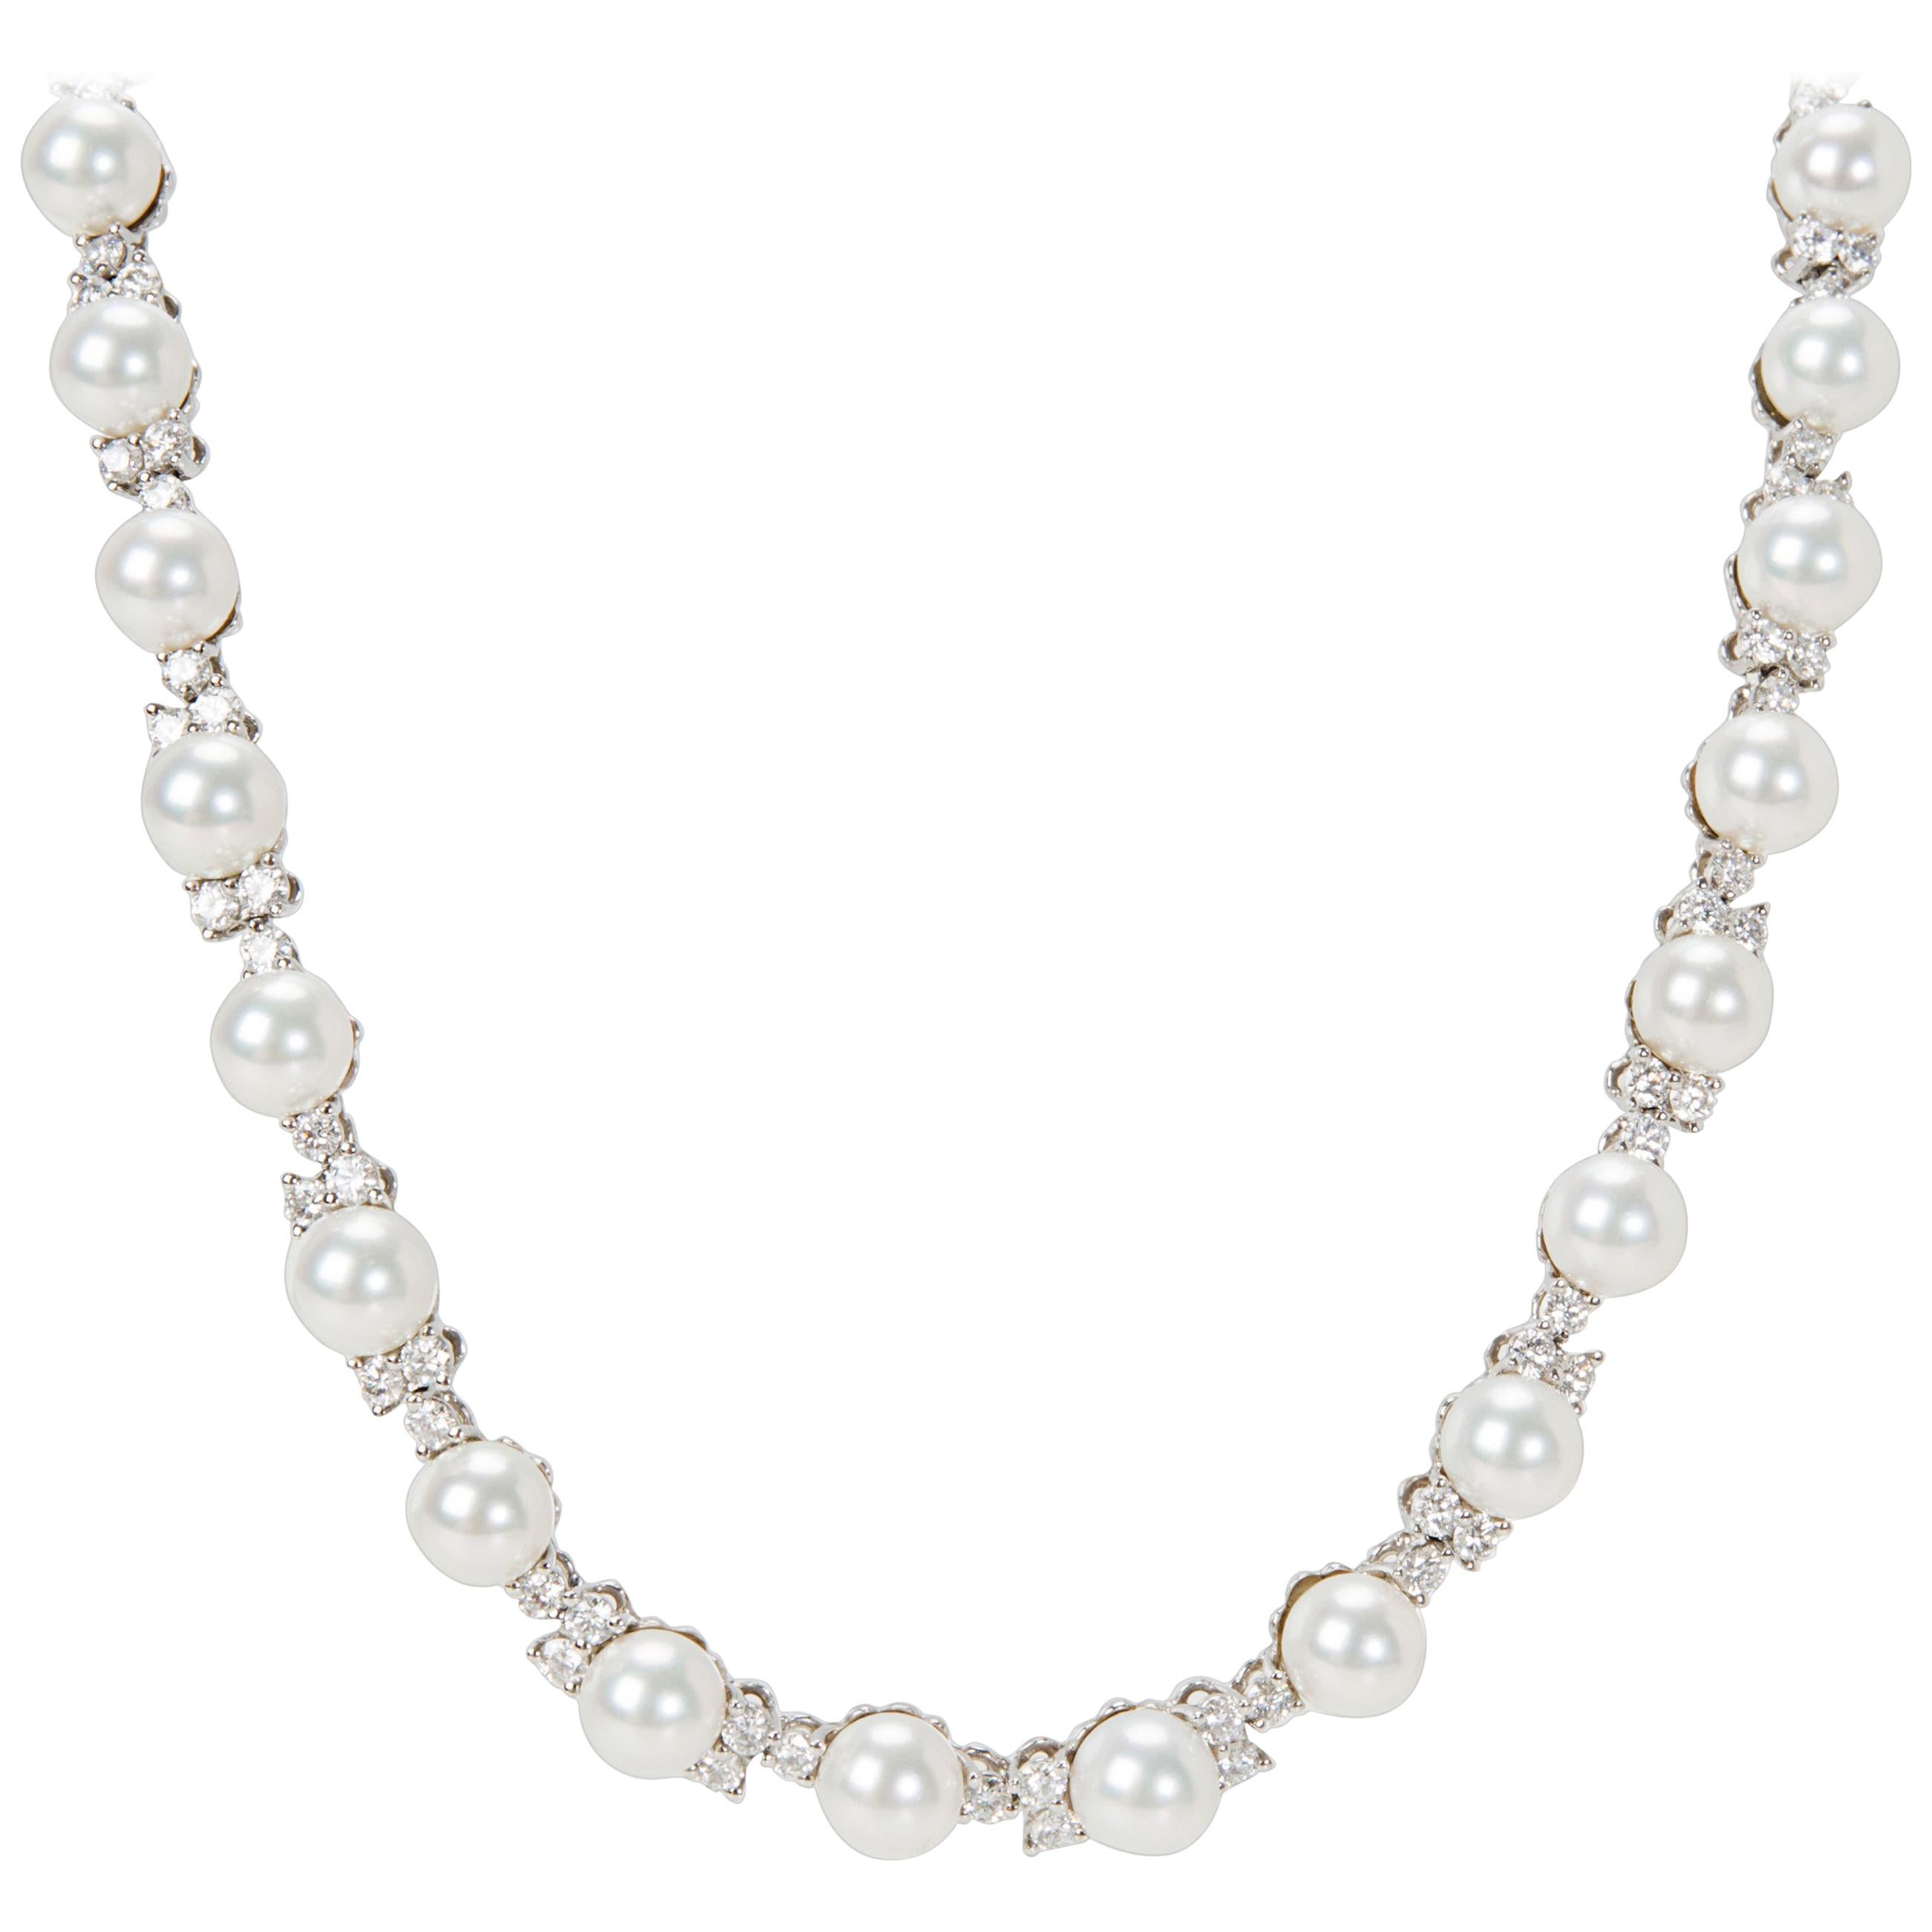 Tiffany & Co. Aria Diamond and Akoya Pearl Necklace in Platinum 5.40 Carats